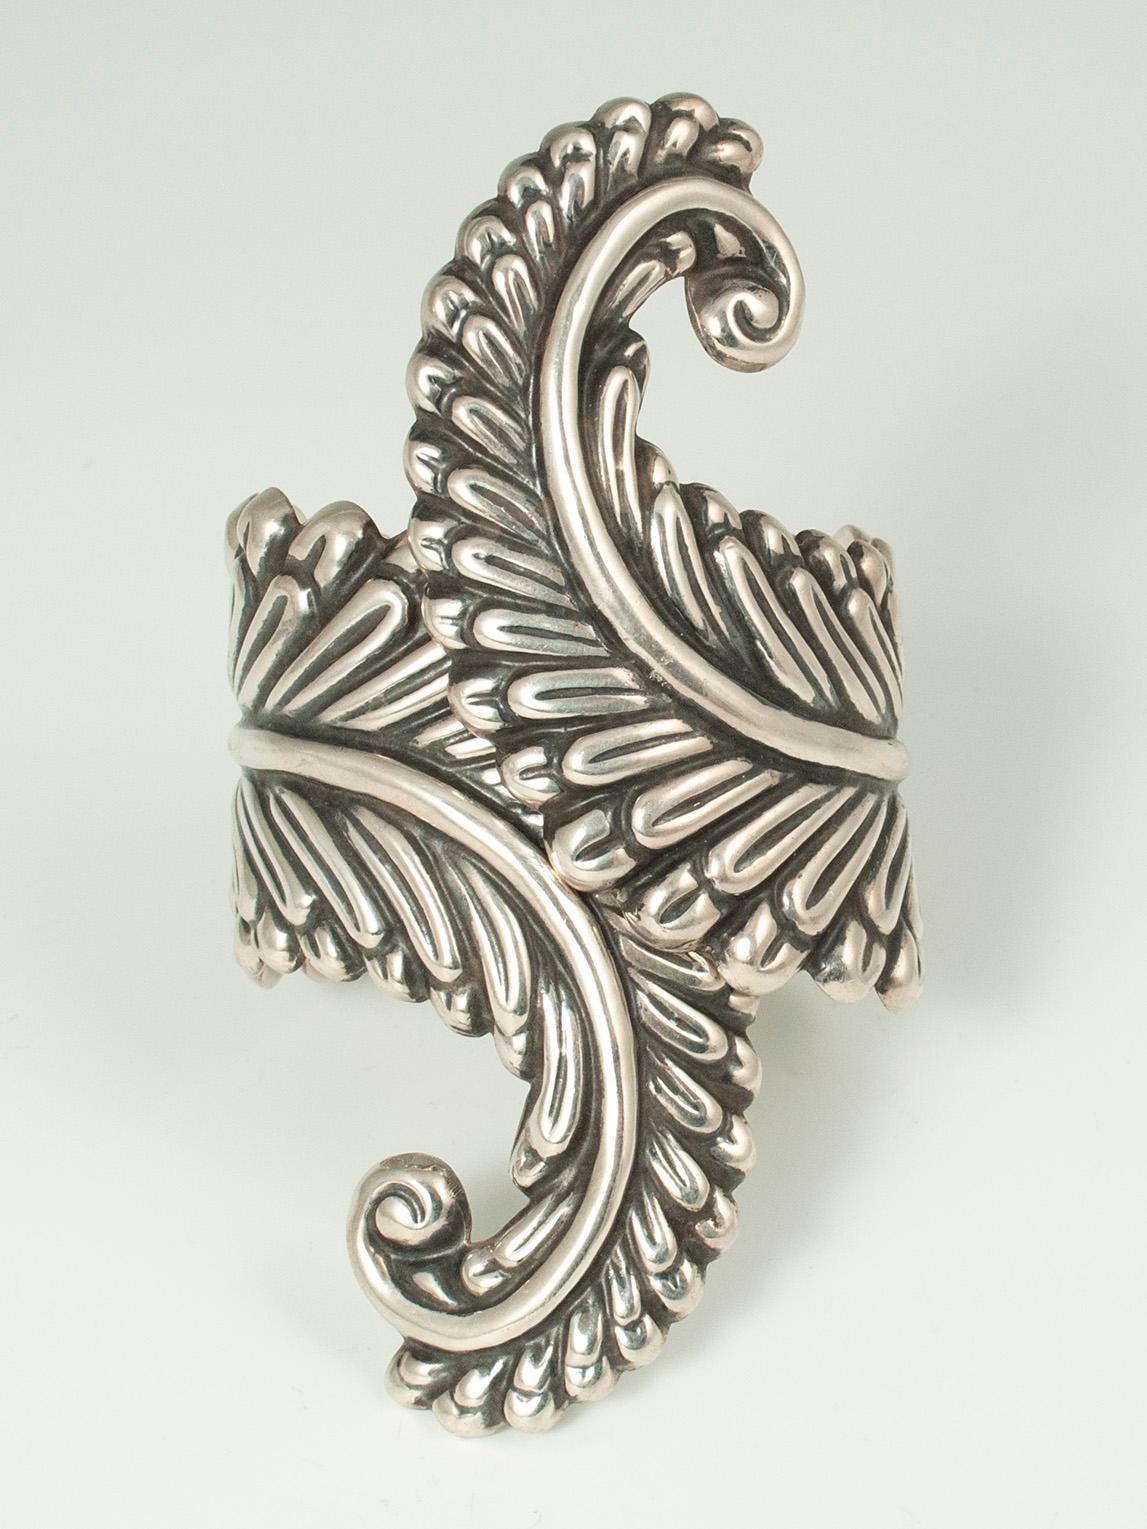 1980s silver Fern clamper bracelet, Taxco, Mexico

This beautiful silver fern clamper bracelet is a little unusual in that the fern is doubled with an extra border on the leaves. The marks inside are: Mexico TS-134 925 NAVA M R.
The interior